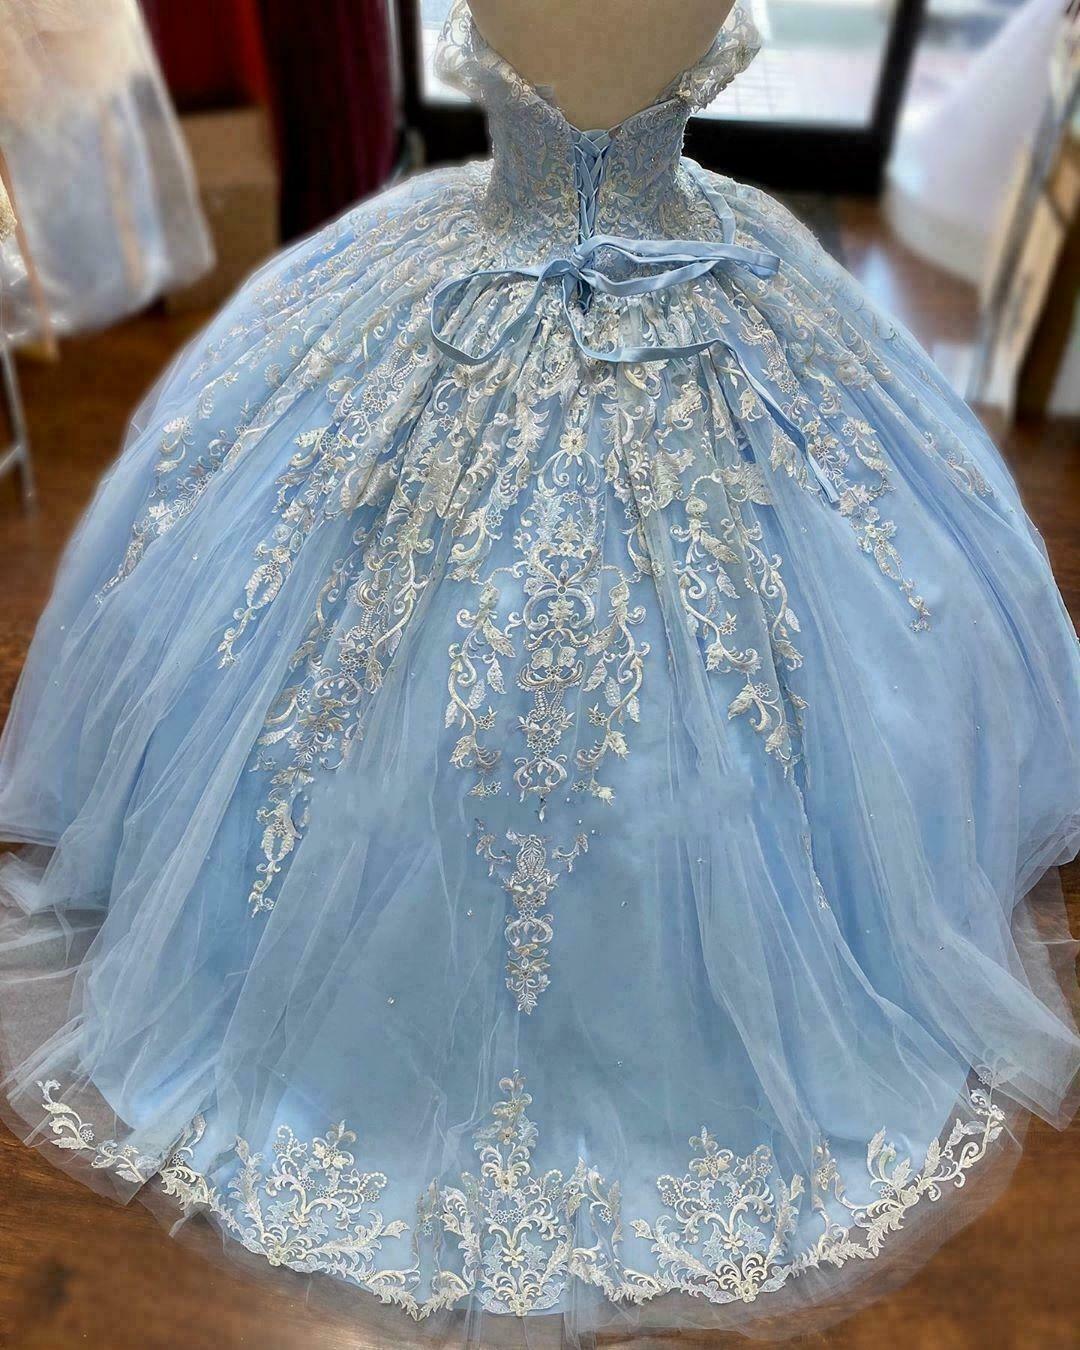 Winter Wonderland Blue Ball Gown Quinceanera Dress Blue Tulle Lace Ball Gown Y674